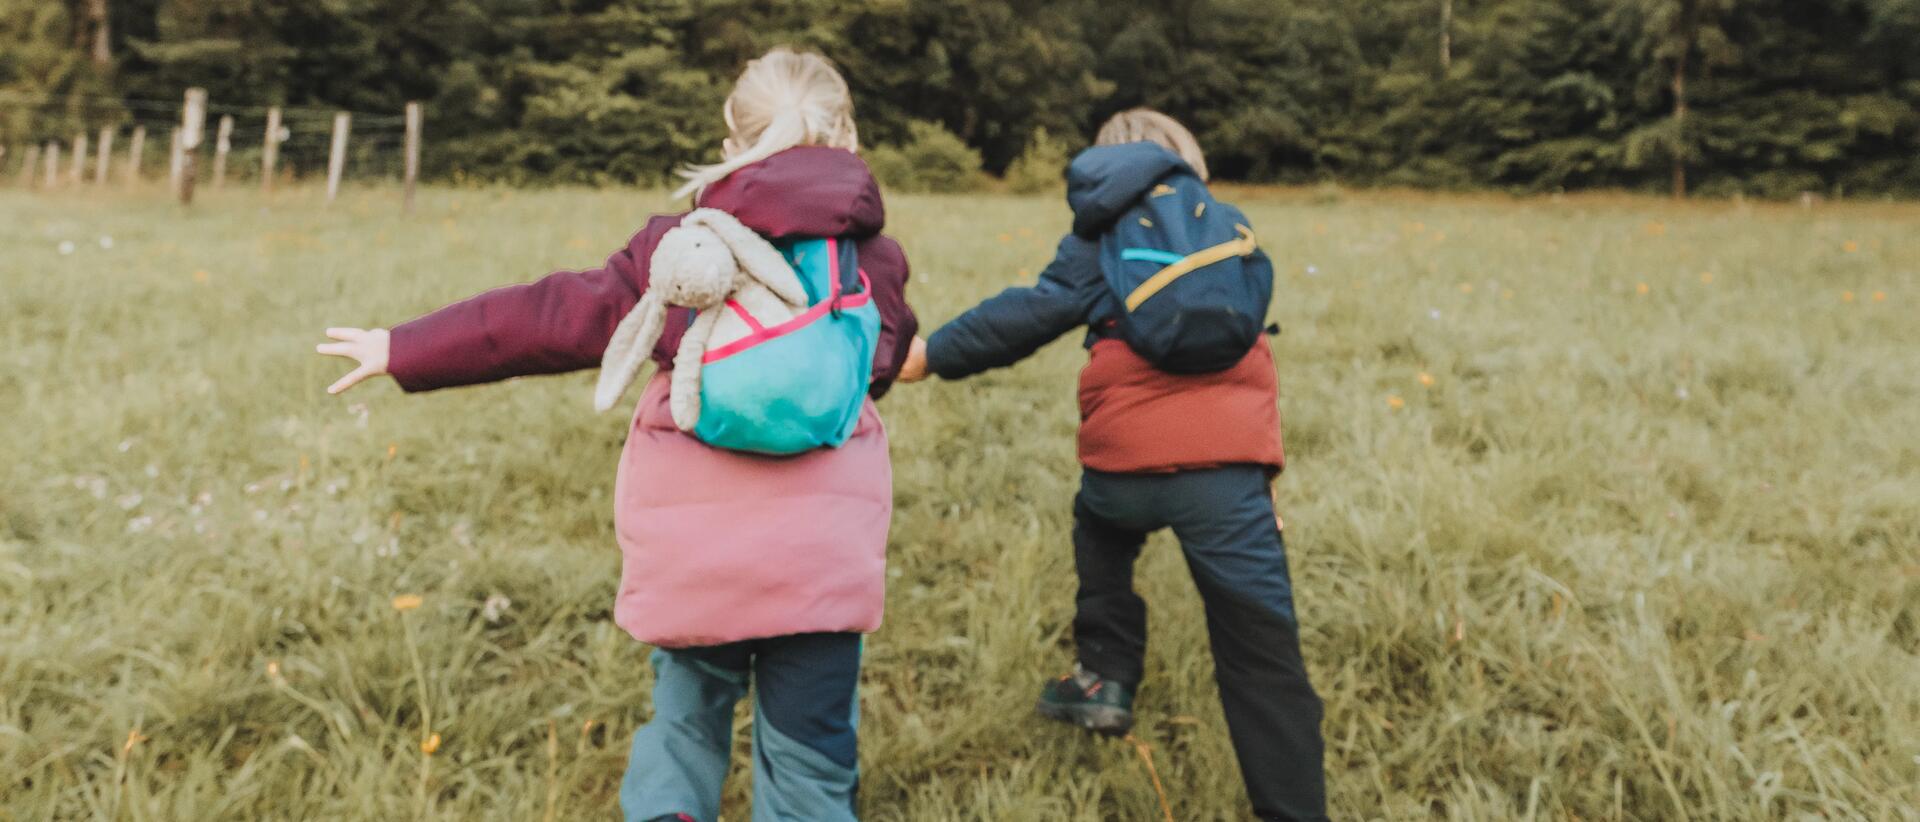 activities to keep your children busy during hikes and walks